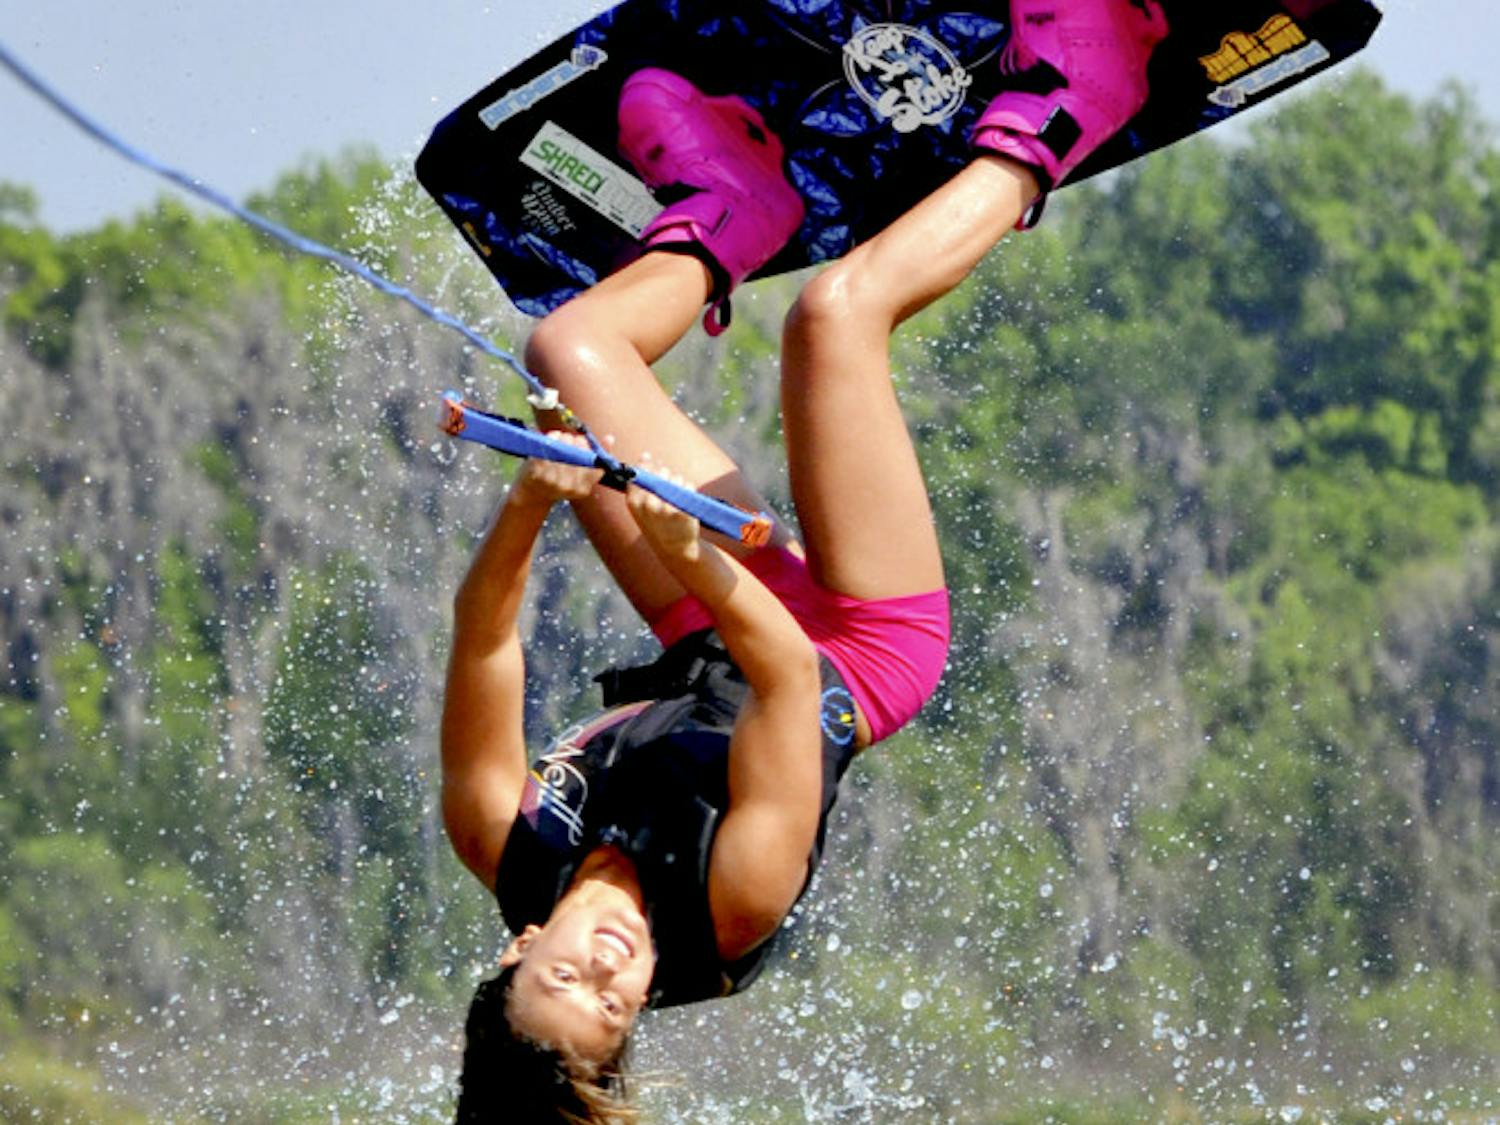 Dixie Smith, a 20-year-old UF biology senior, performs a wakeboard stunt on Lake Wauberg.